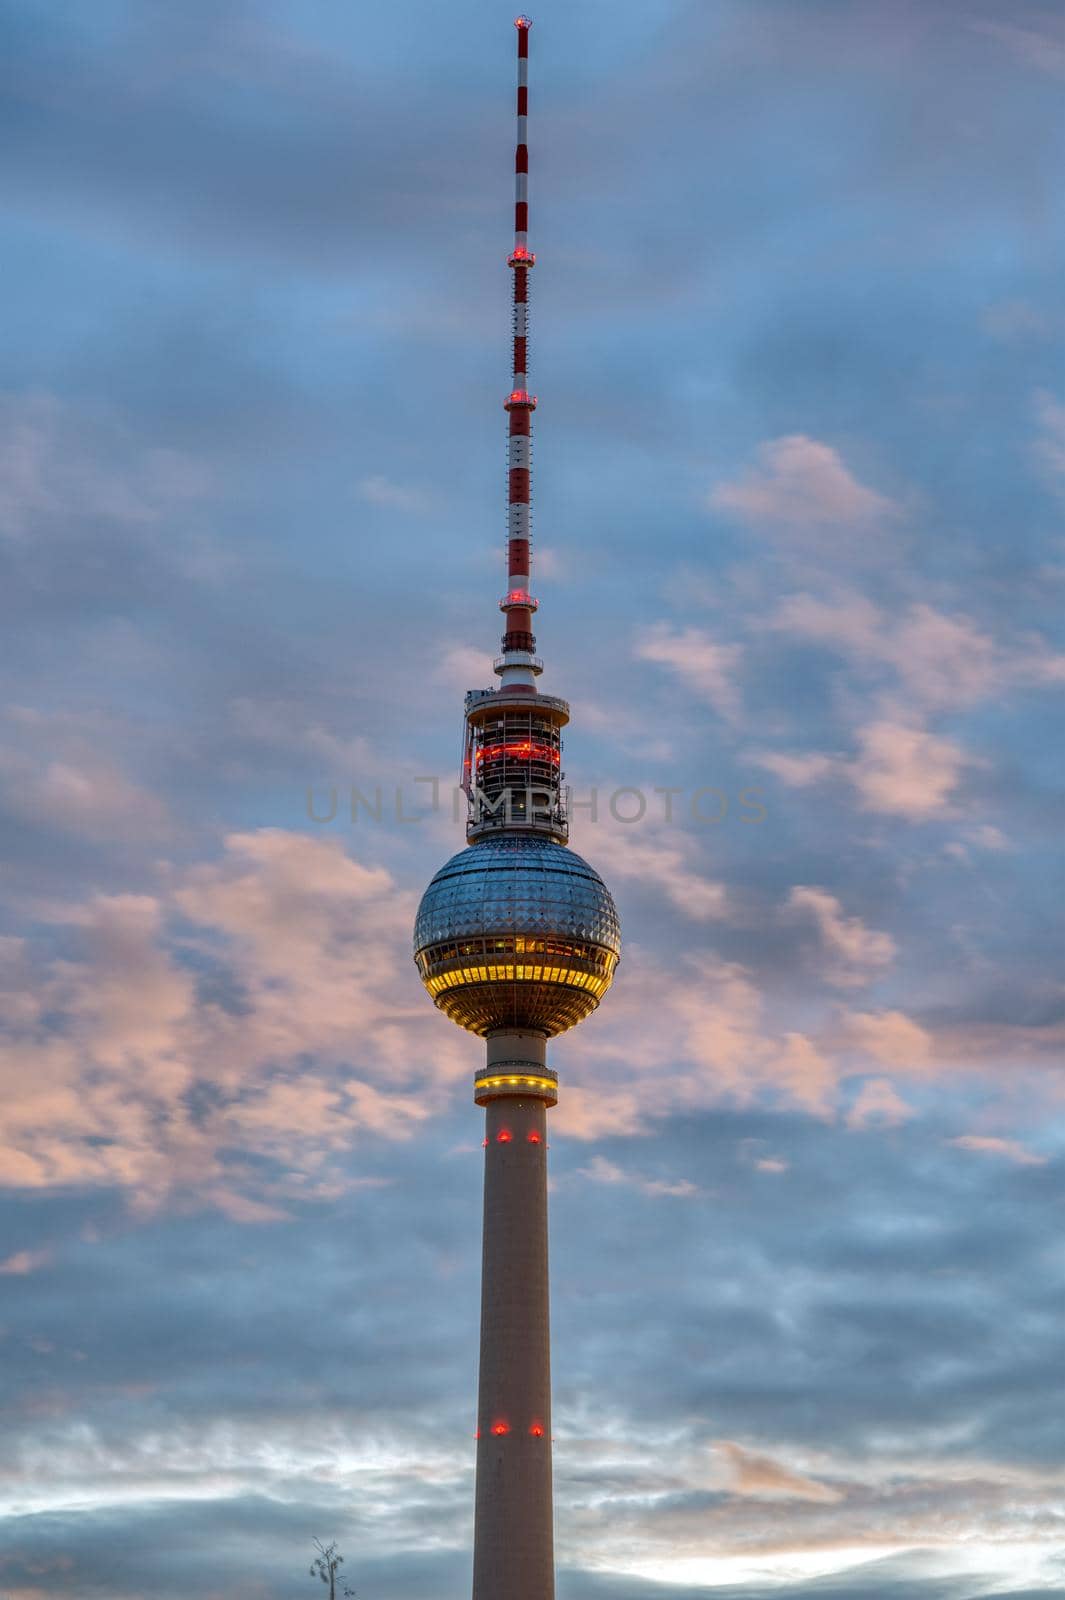 The famous Television Tower in Berlin by elxeneize